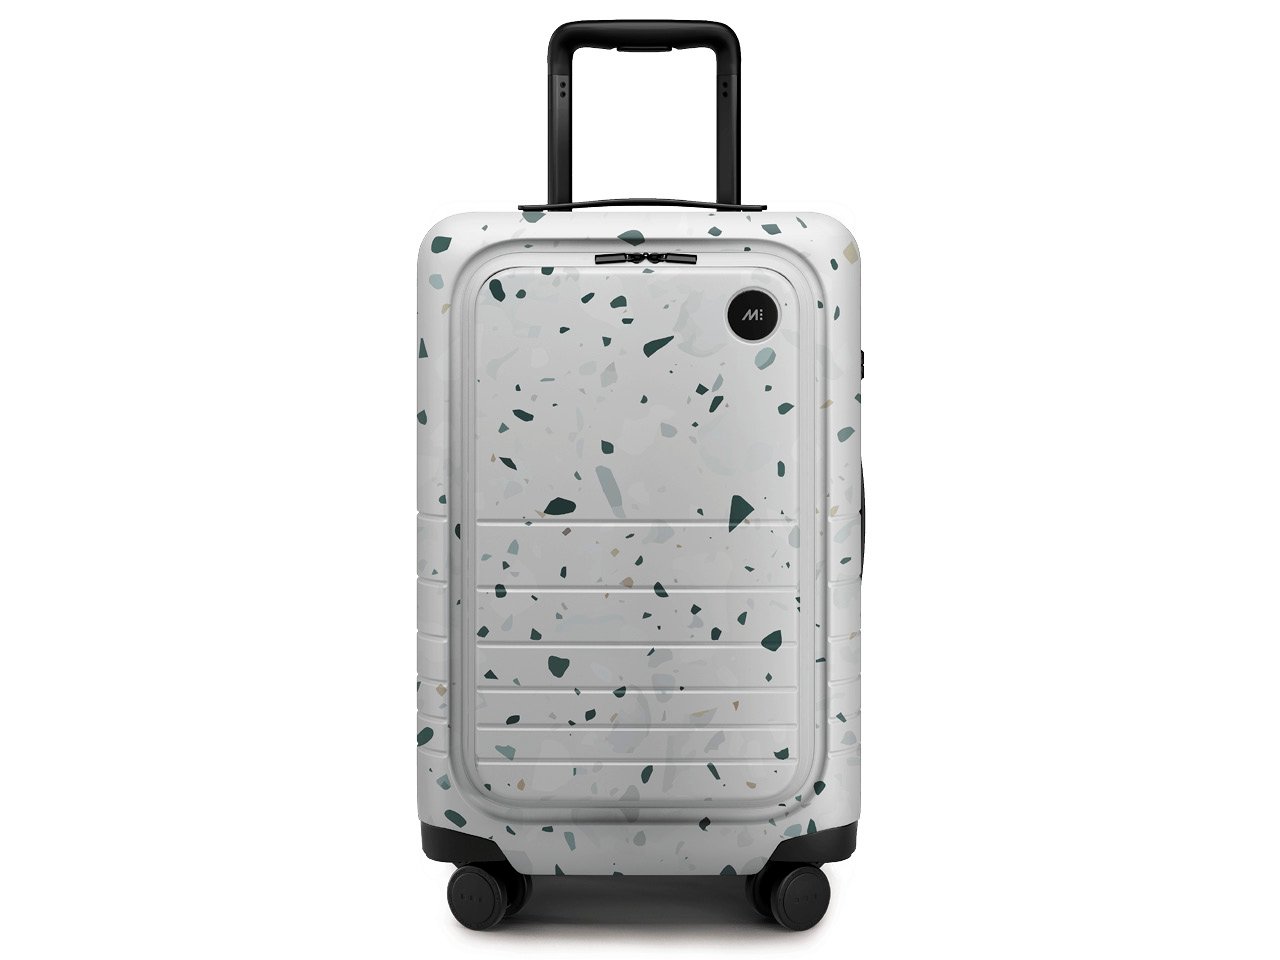 A terrazzo Monos Carry-on Pro suitcase, one of Chatelaine's best carry-on suitcases.